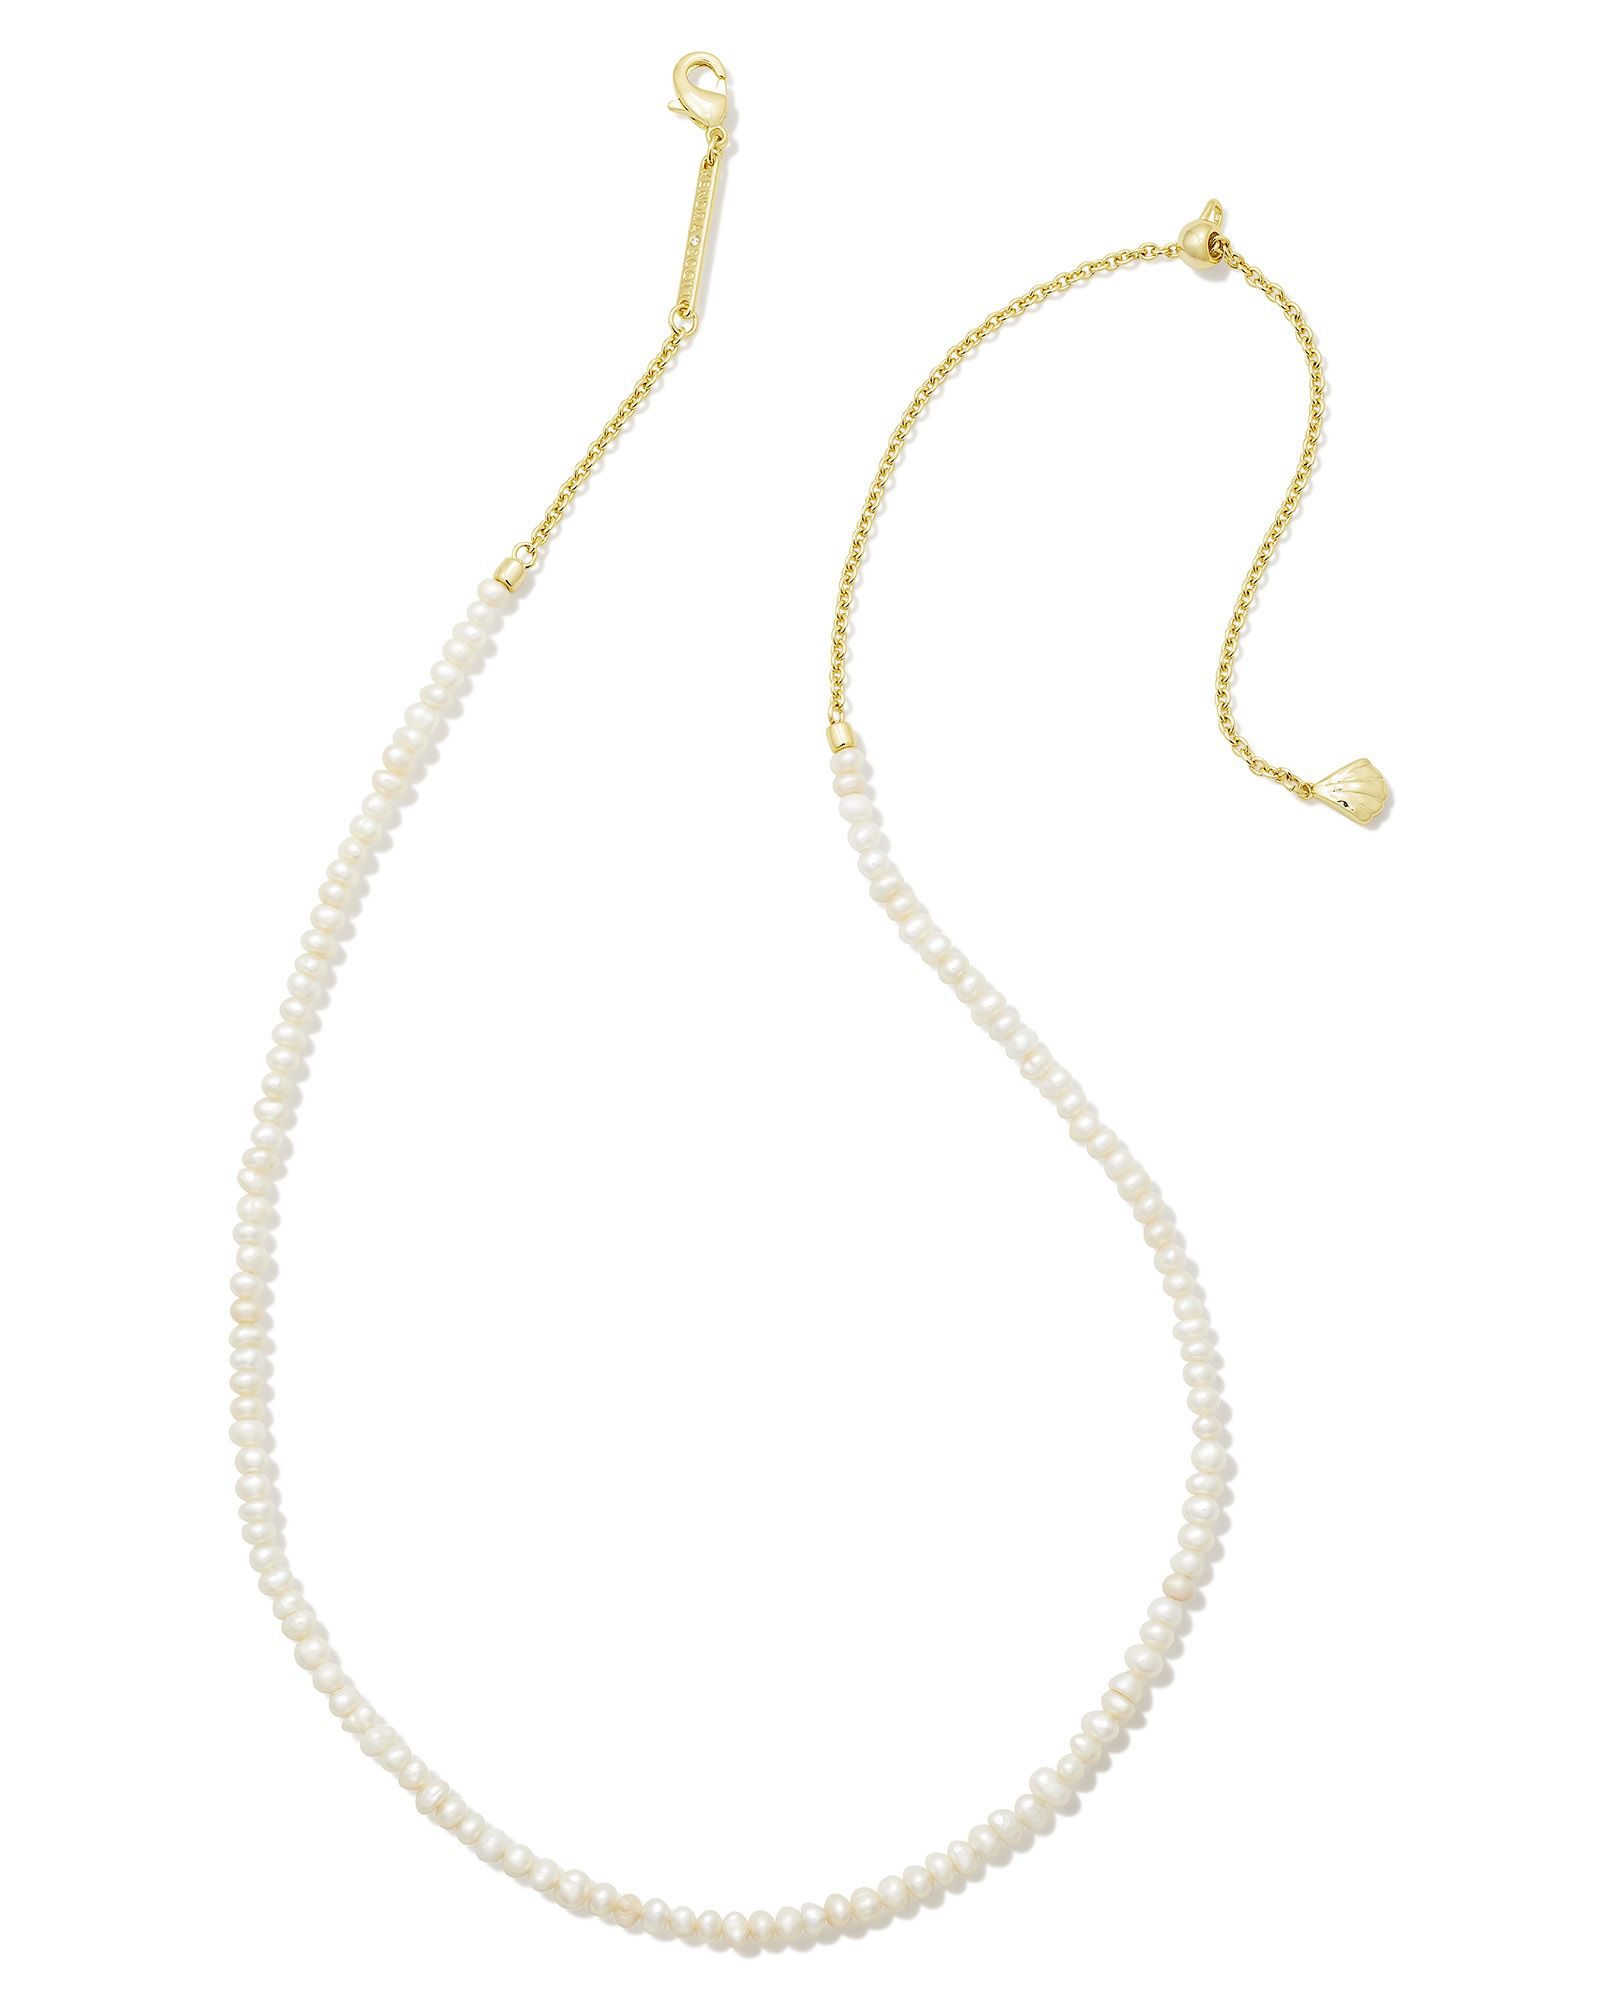 Lolo Gold Strand Necklace in White Pearl | Kendra Scott